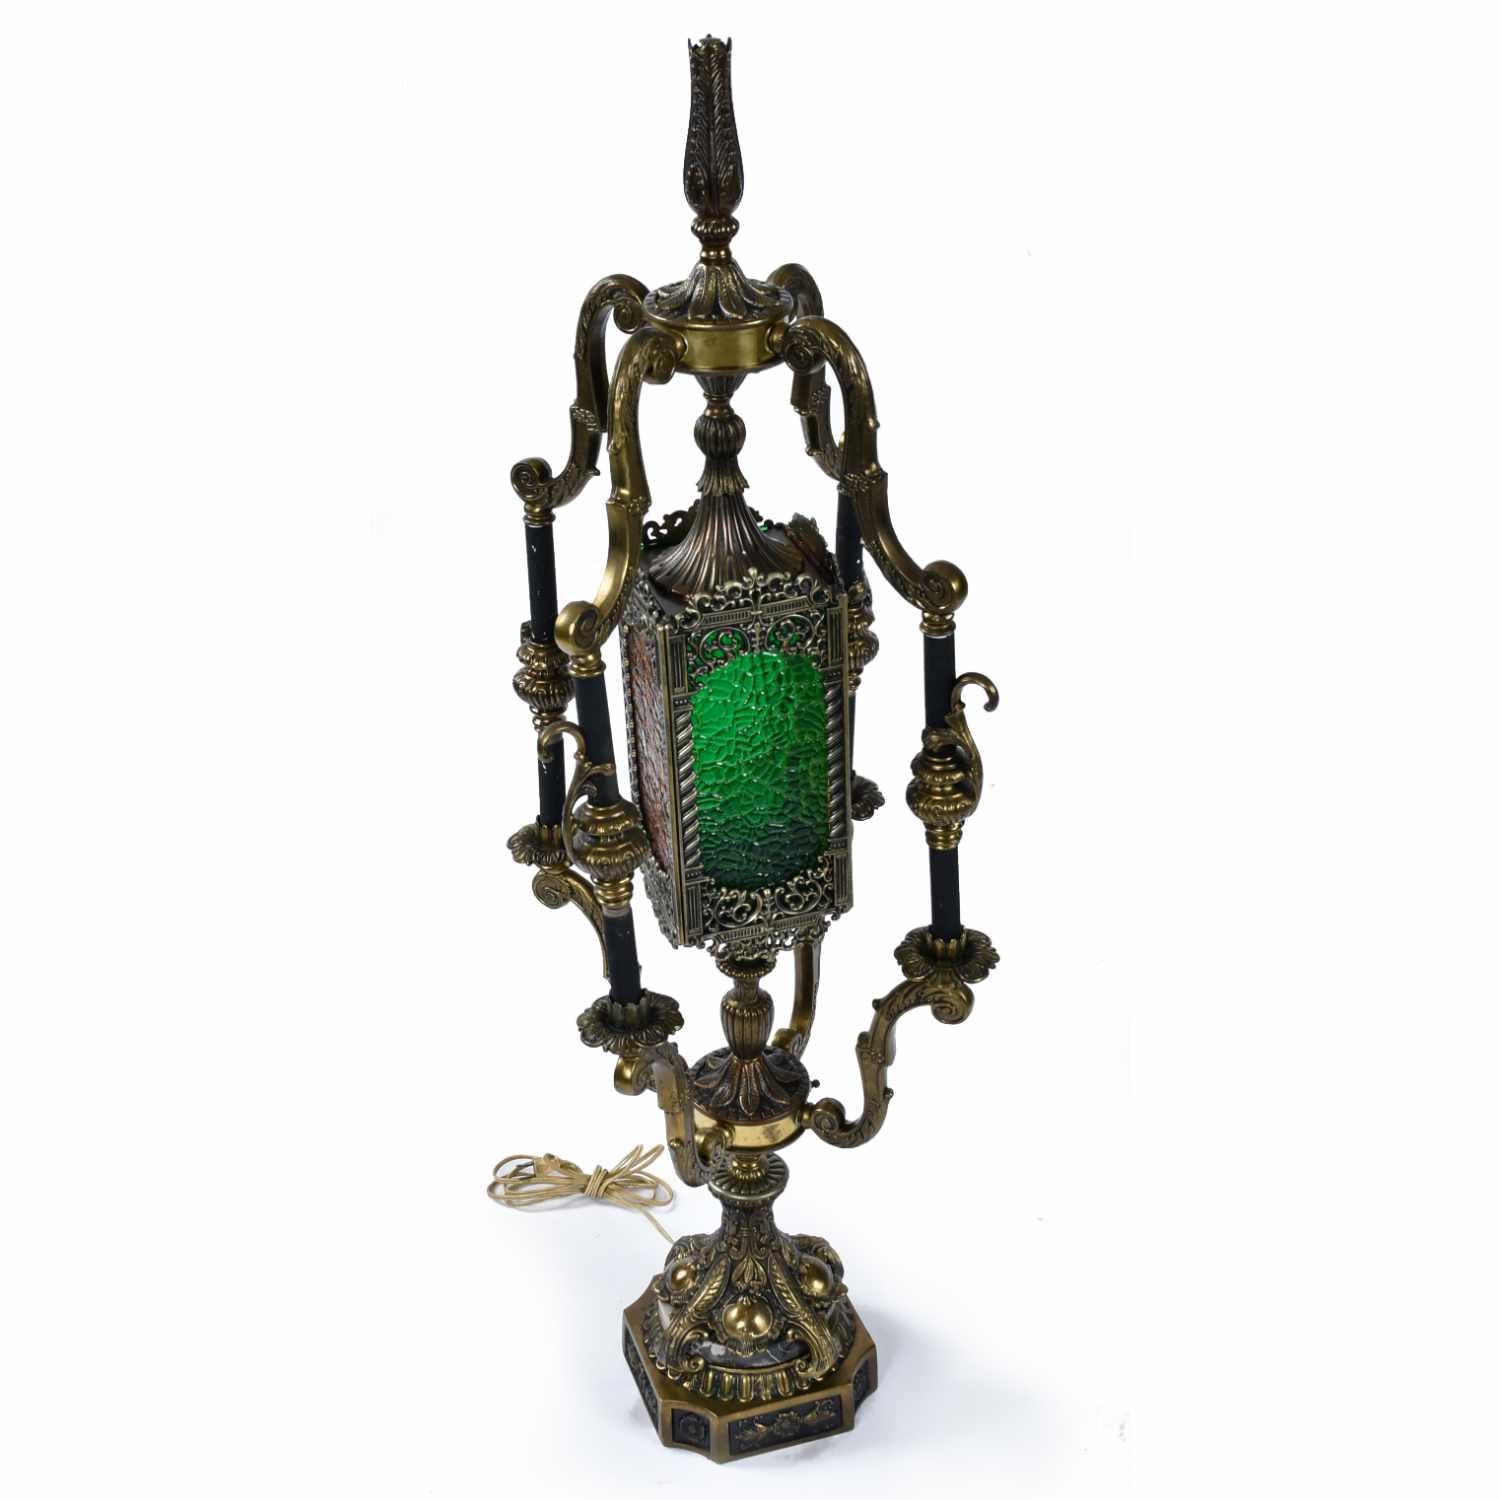 Gothic Revival Vintage Gothic Baroque Metal Table Lamp with Orange and Green Stained Glass